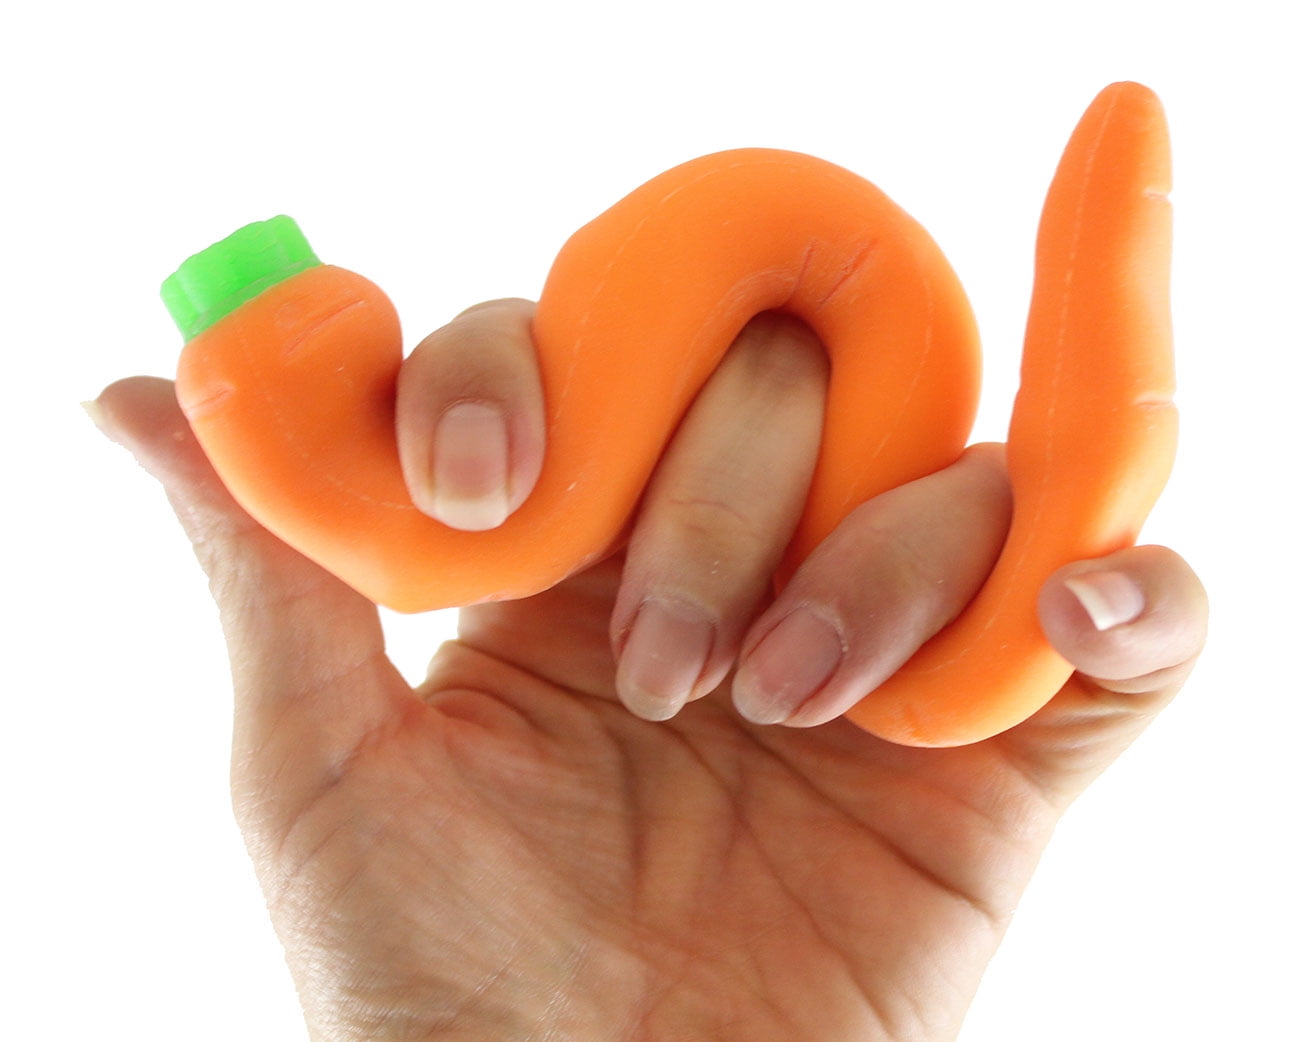 1 Squishy Sand-Filled Carrot - Moldable Sensory, Stress, Squeeze Fidget Toy  ADHD Special Needs Soothing Food OT Toy 